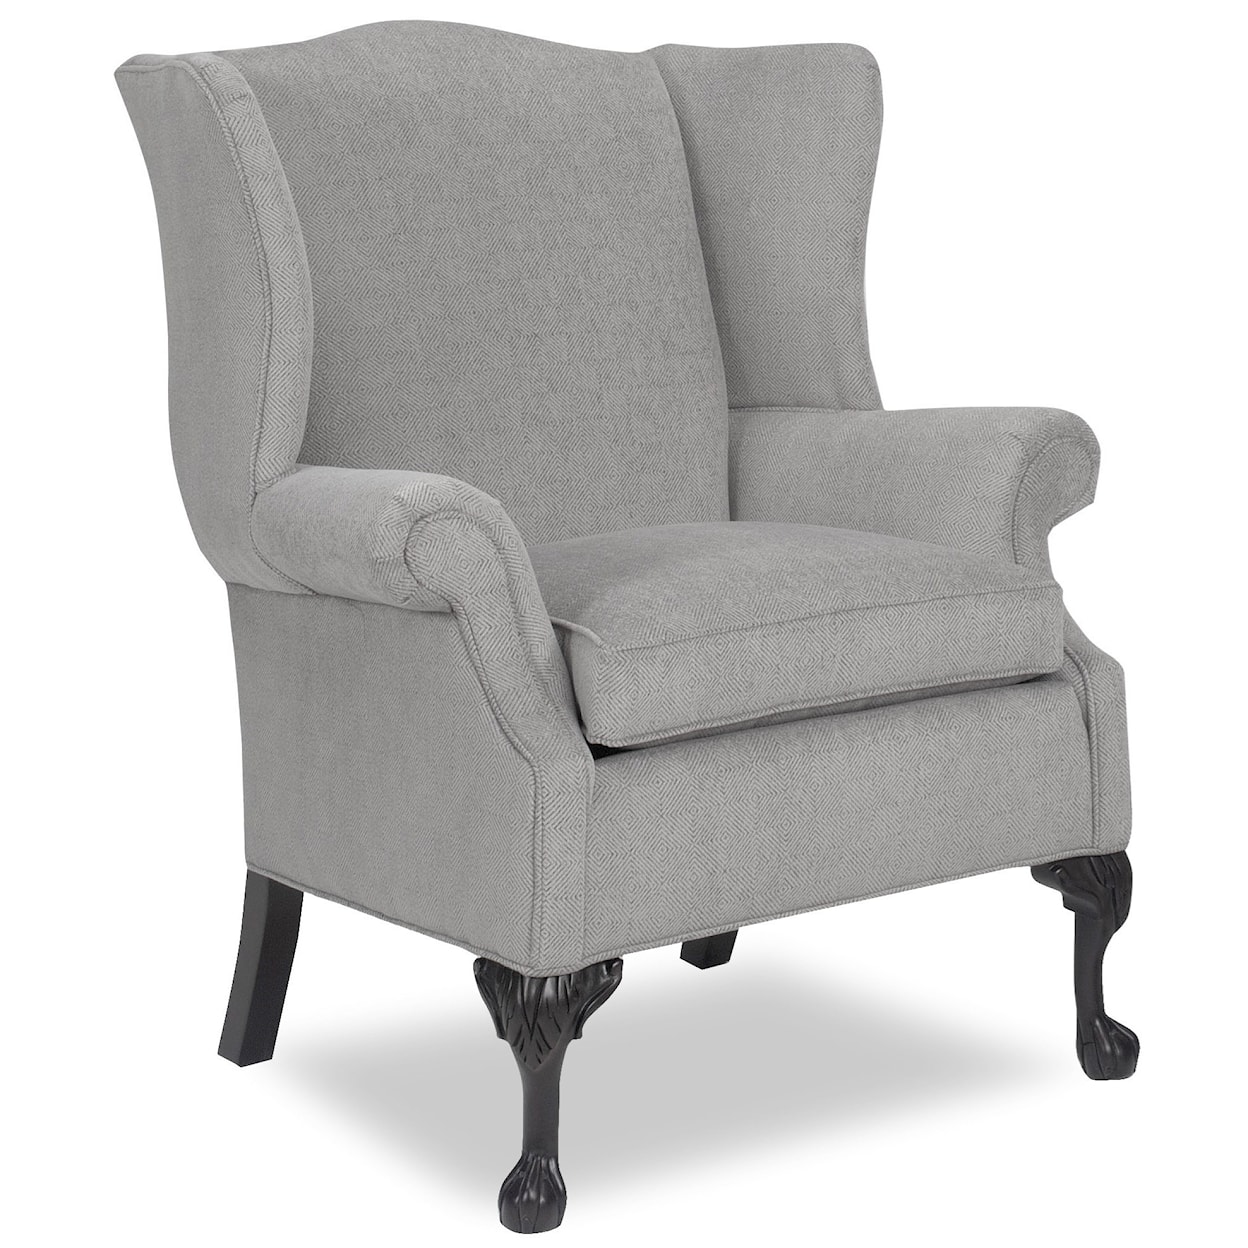 Temple Furniture Trevor Wing Back Chair